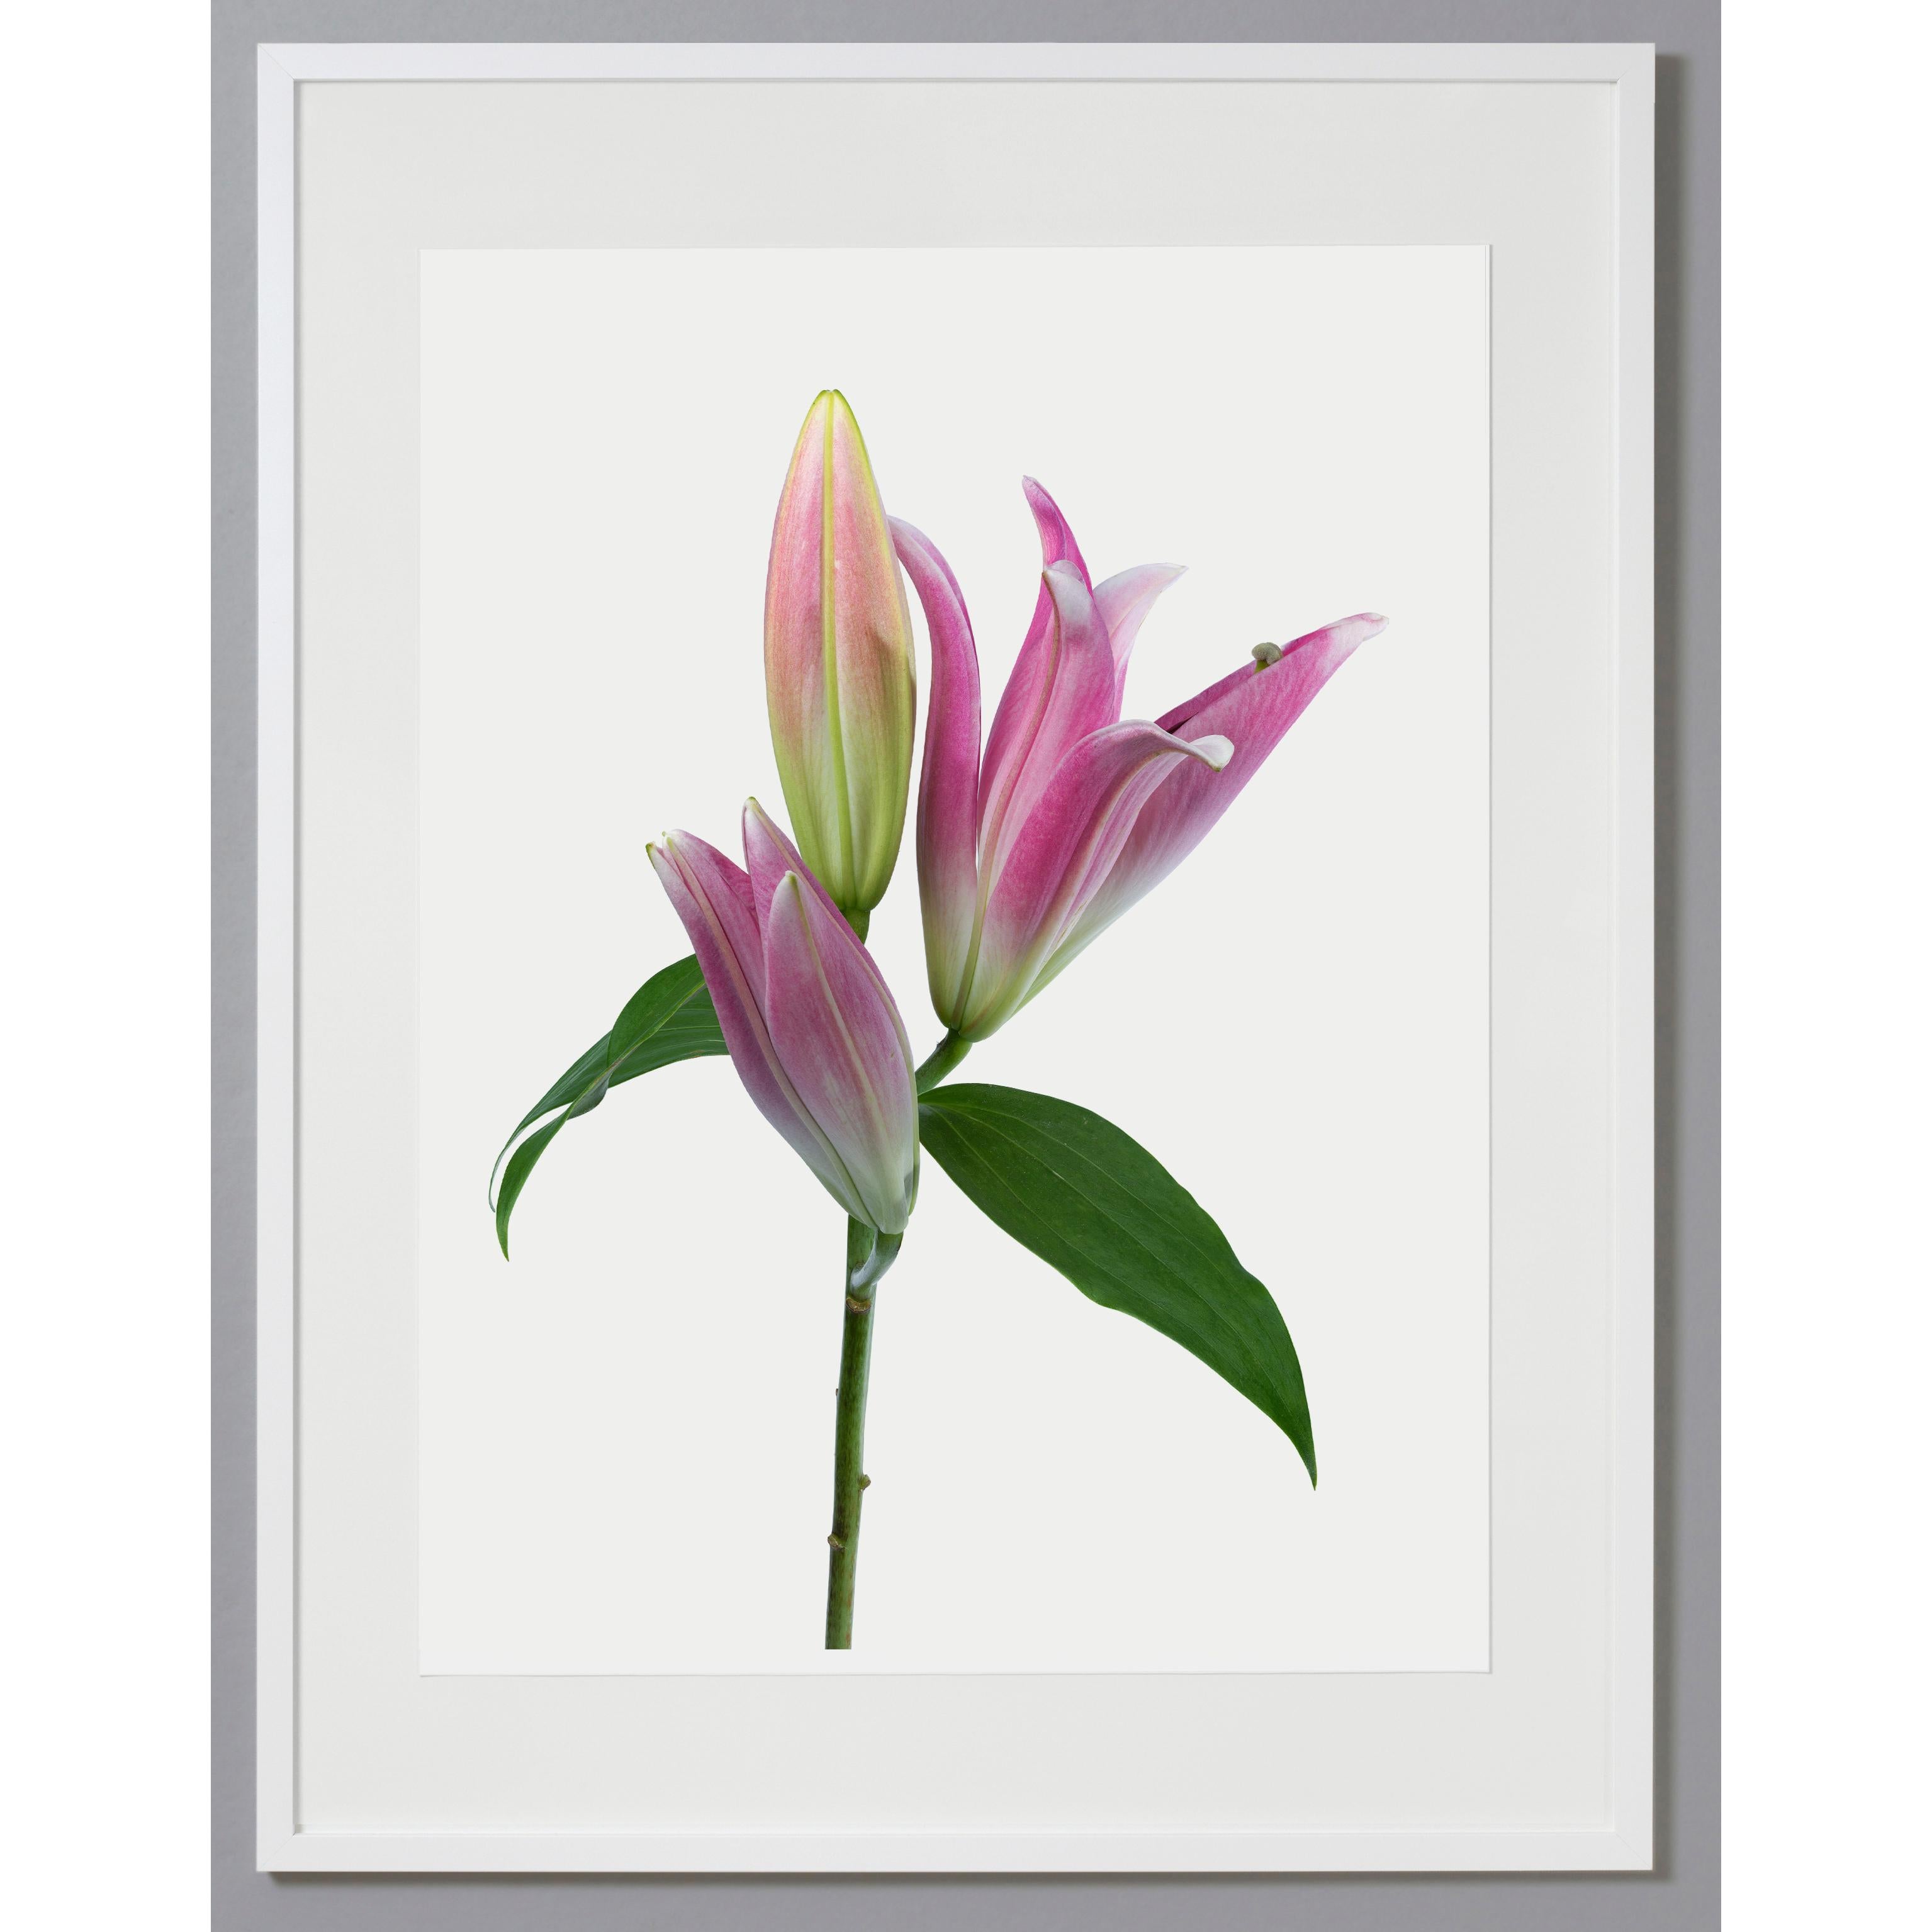 Lily 181 B, archival pigment print photograph, printed on Fine Art paper by Tim Nighswander.  It is 16x20, framed in a white frame to 22x32 with a UV plexiglass.  It is a limited edition of 15, signed and numbered.  The fine detail makes this